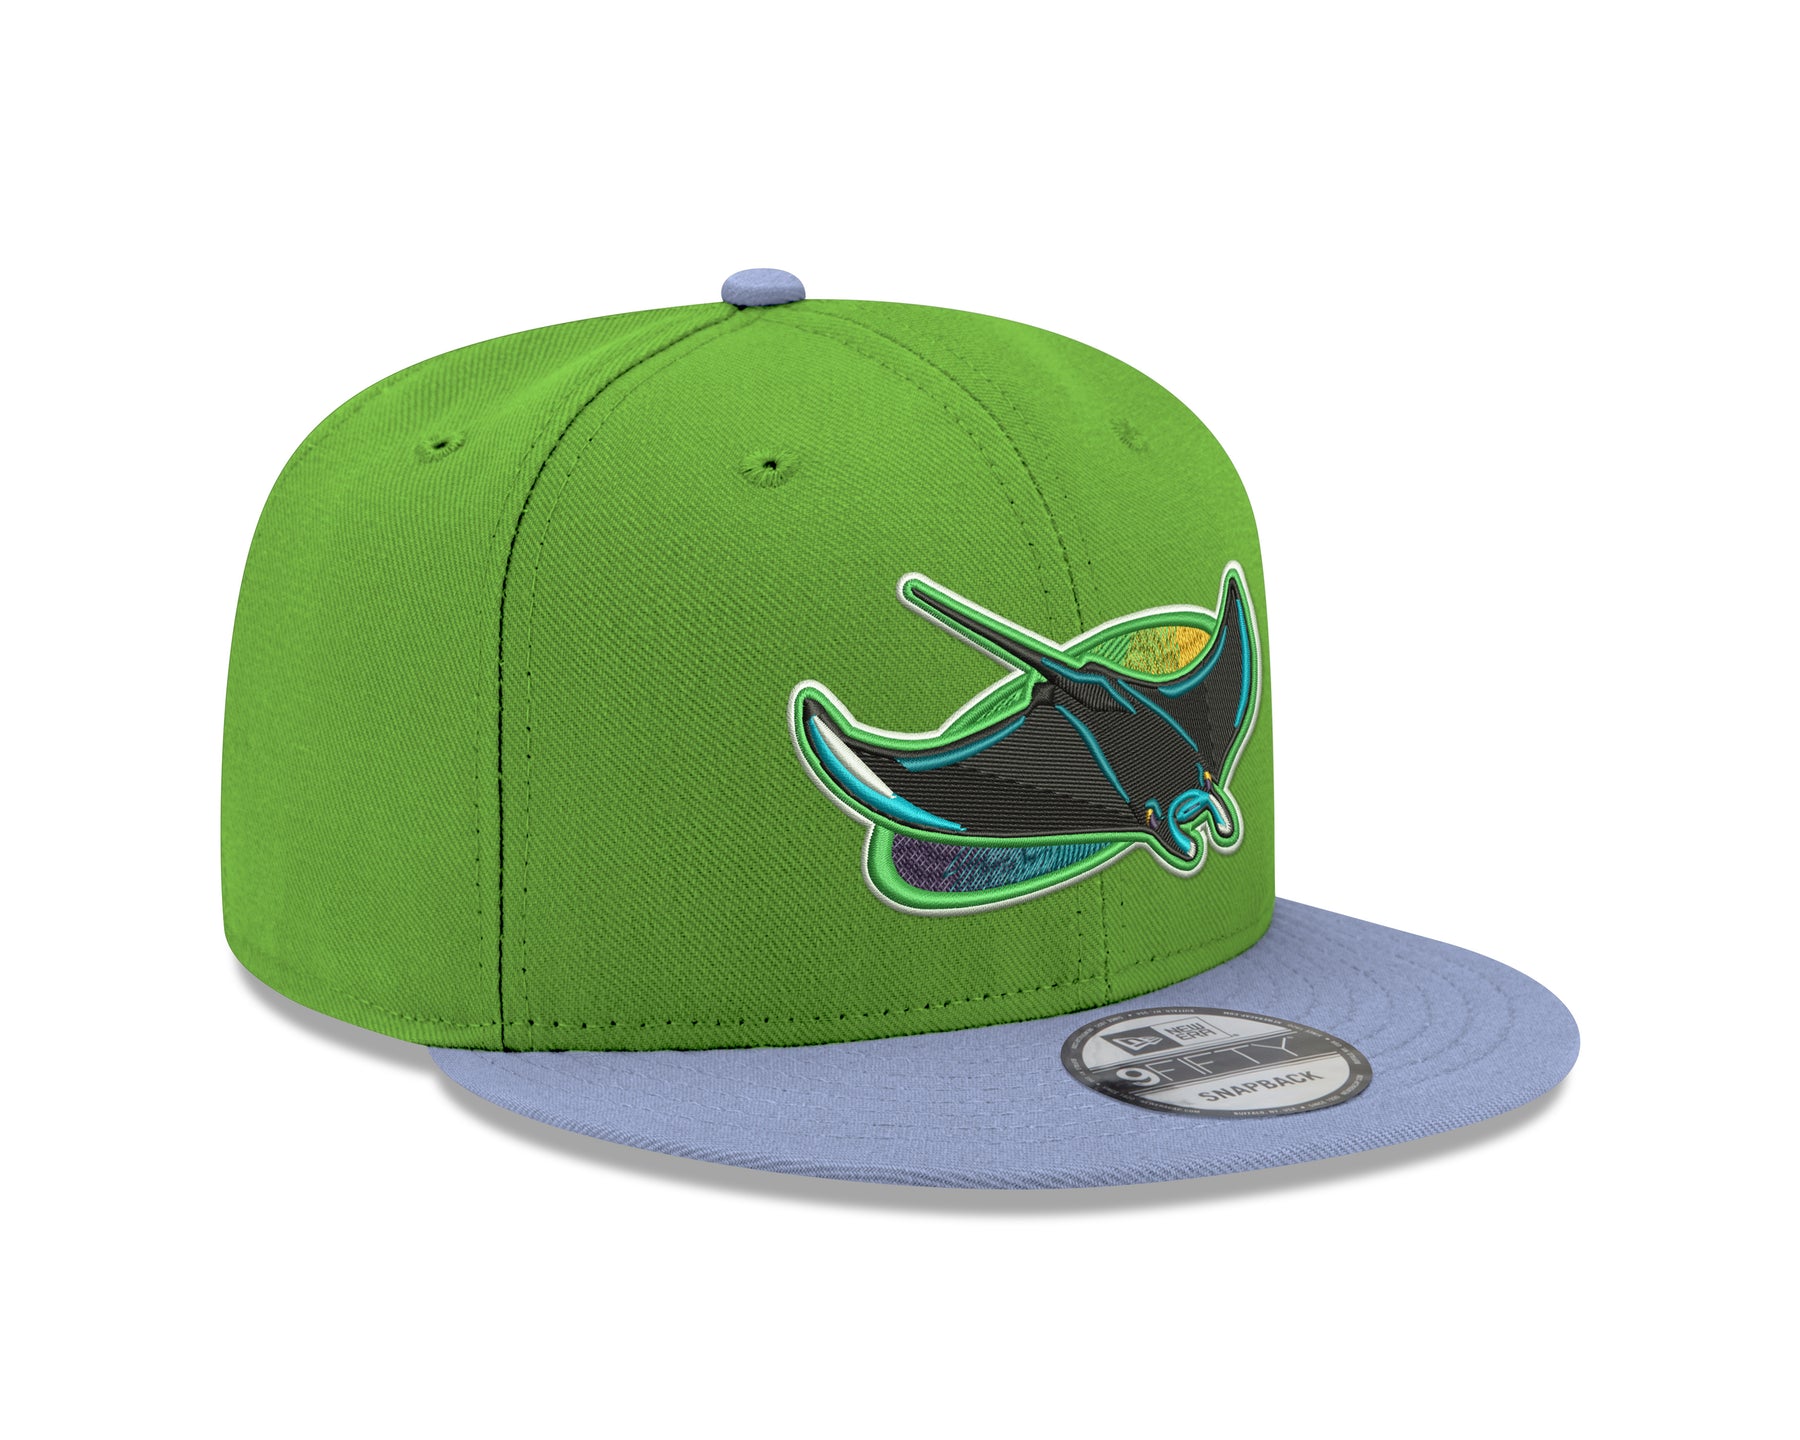 RAYS LIME AND LAVENDER DEVIL RAYS ALT NEW ERA 9FIFTY SNAPBACK HAT